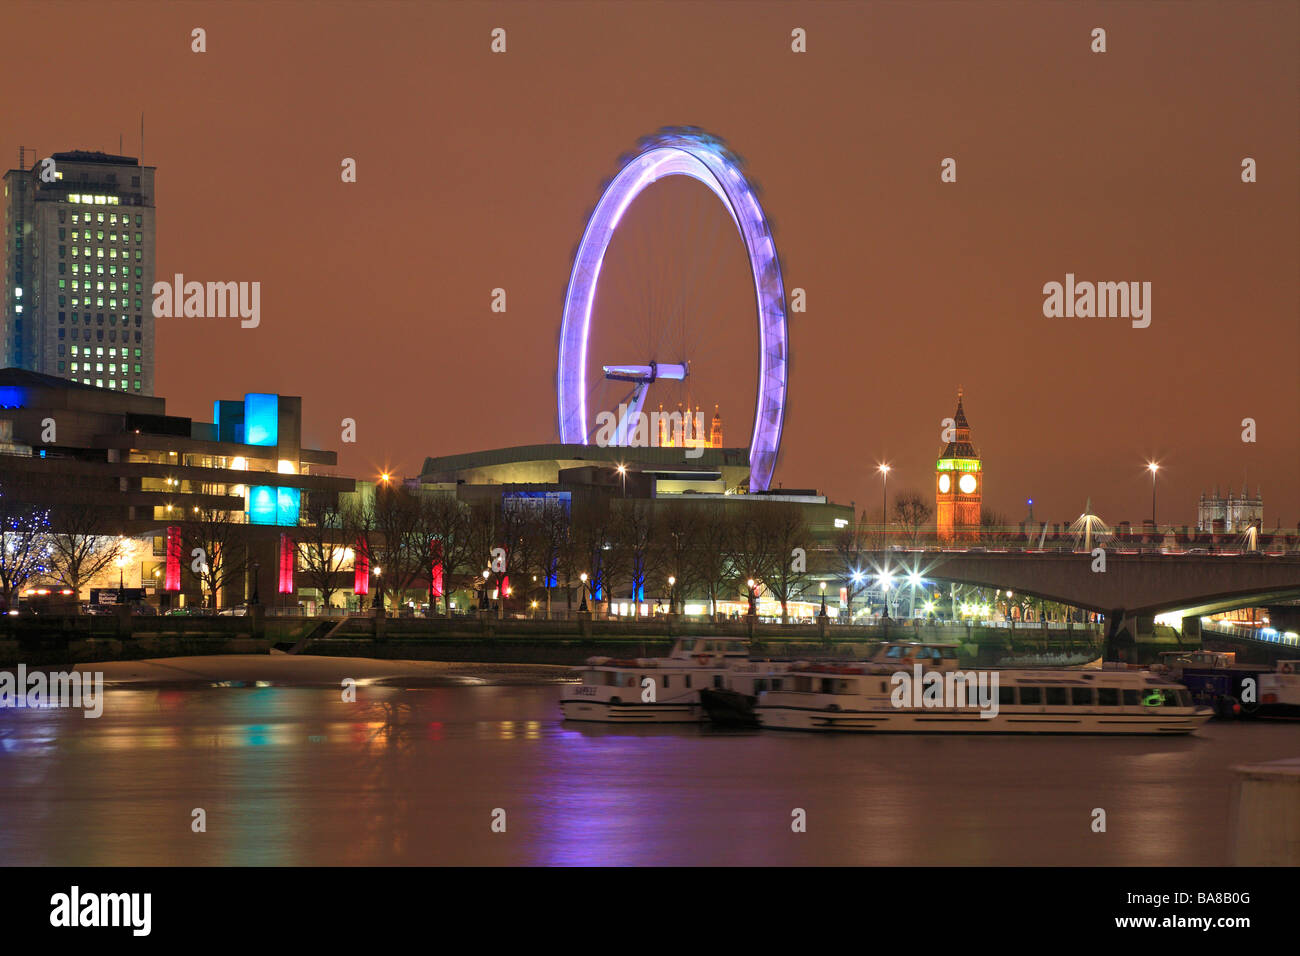 National Theatre, London Eye, Big Ben on the South Bank across the River Thames at night, London, England, UK. Stock Photo